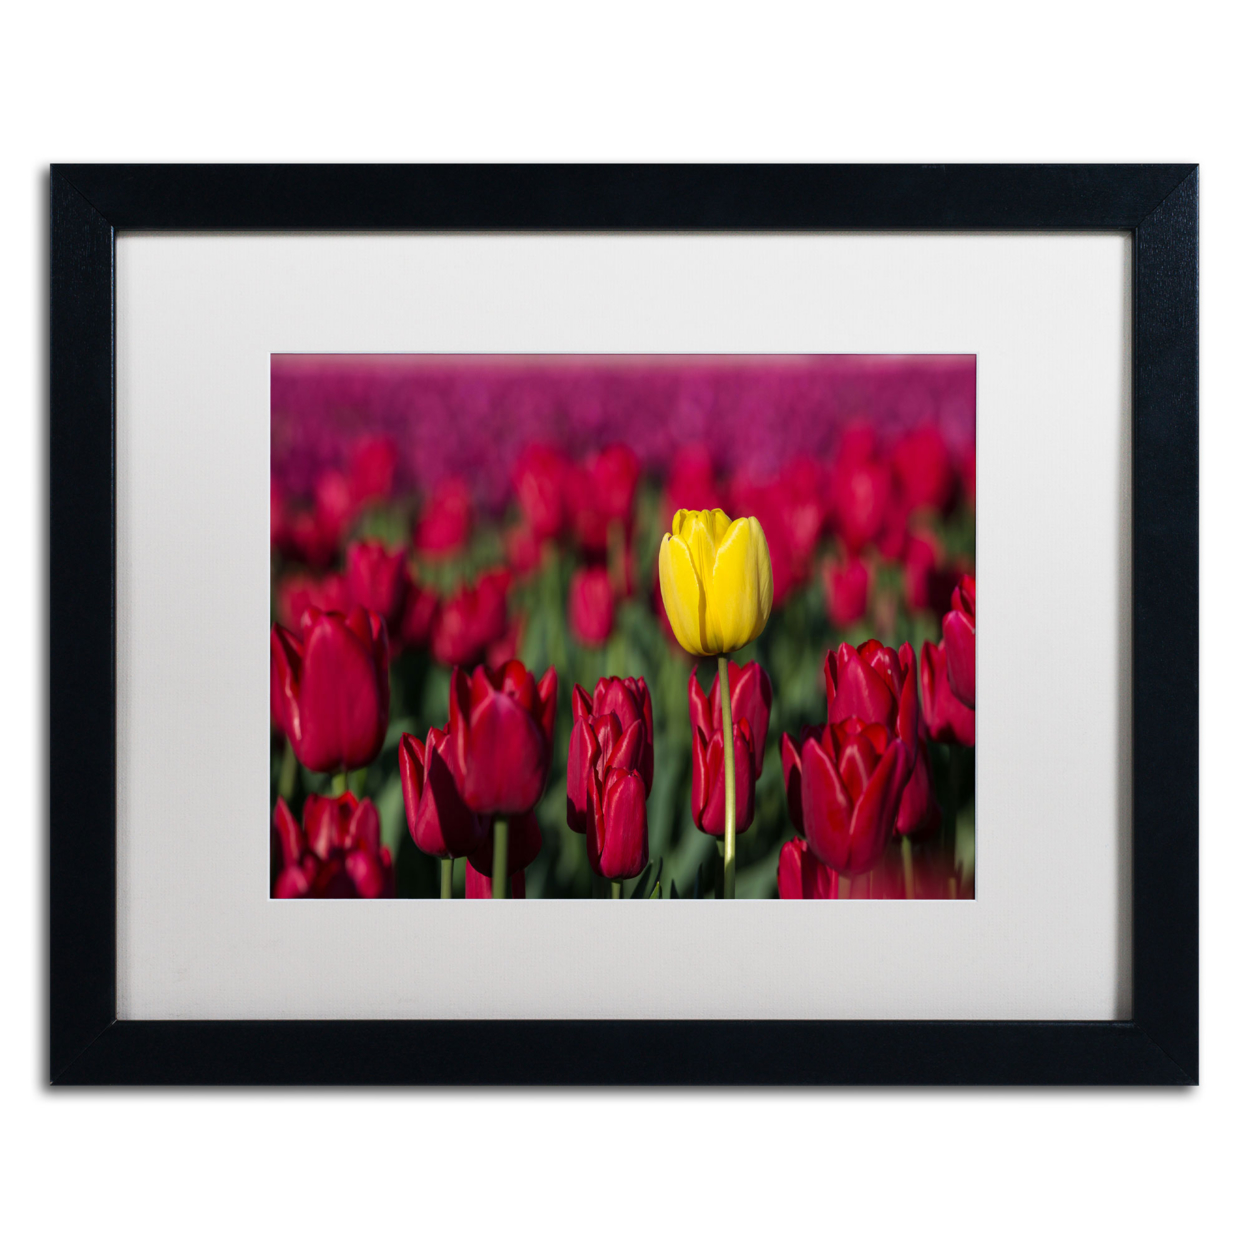 Pierre Leclerc 'Yellow Tulip' Black Wooden Framed Art 18 X 22 Inches